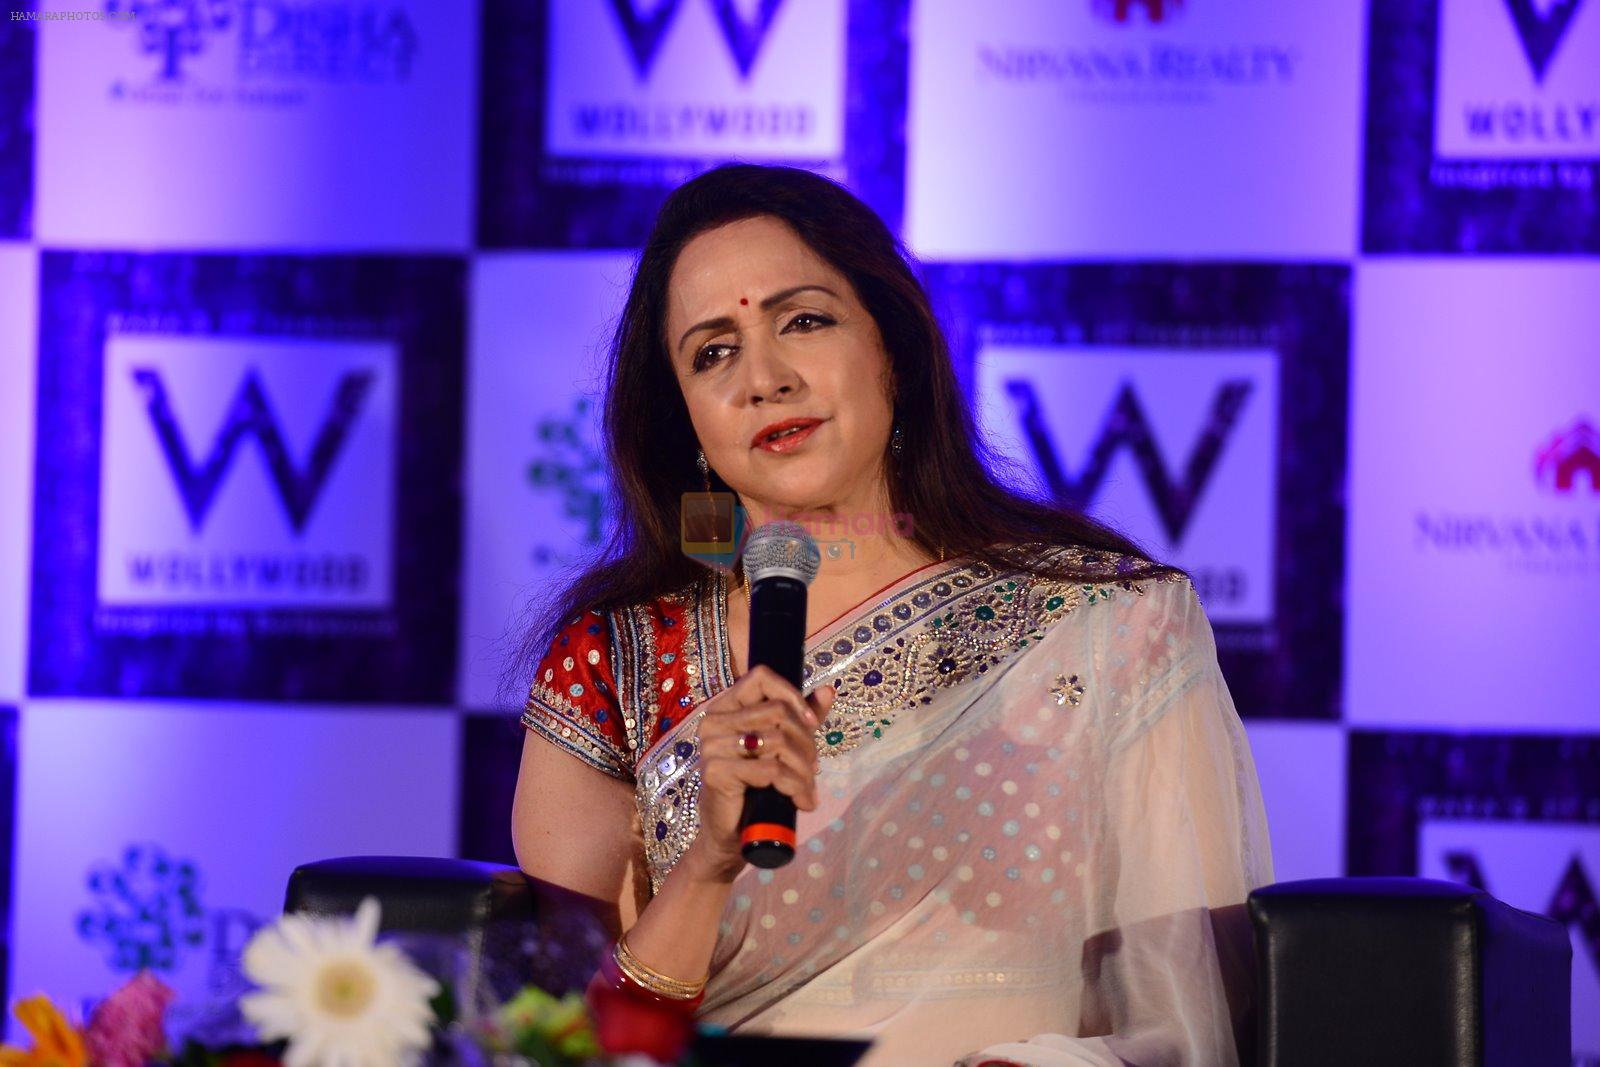 Hema Malini at the launch of Wollywood, Wada's first integrated Bollywood inspired township in Mumbai on 11th Nov 2014